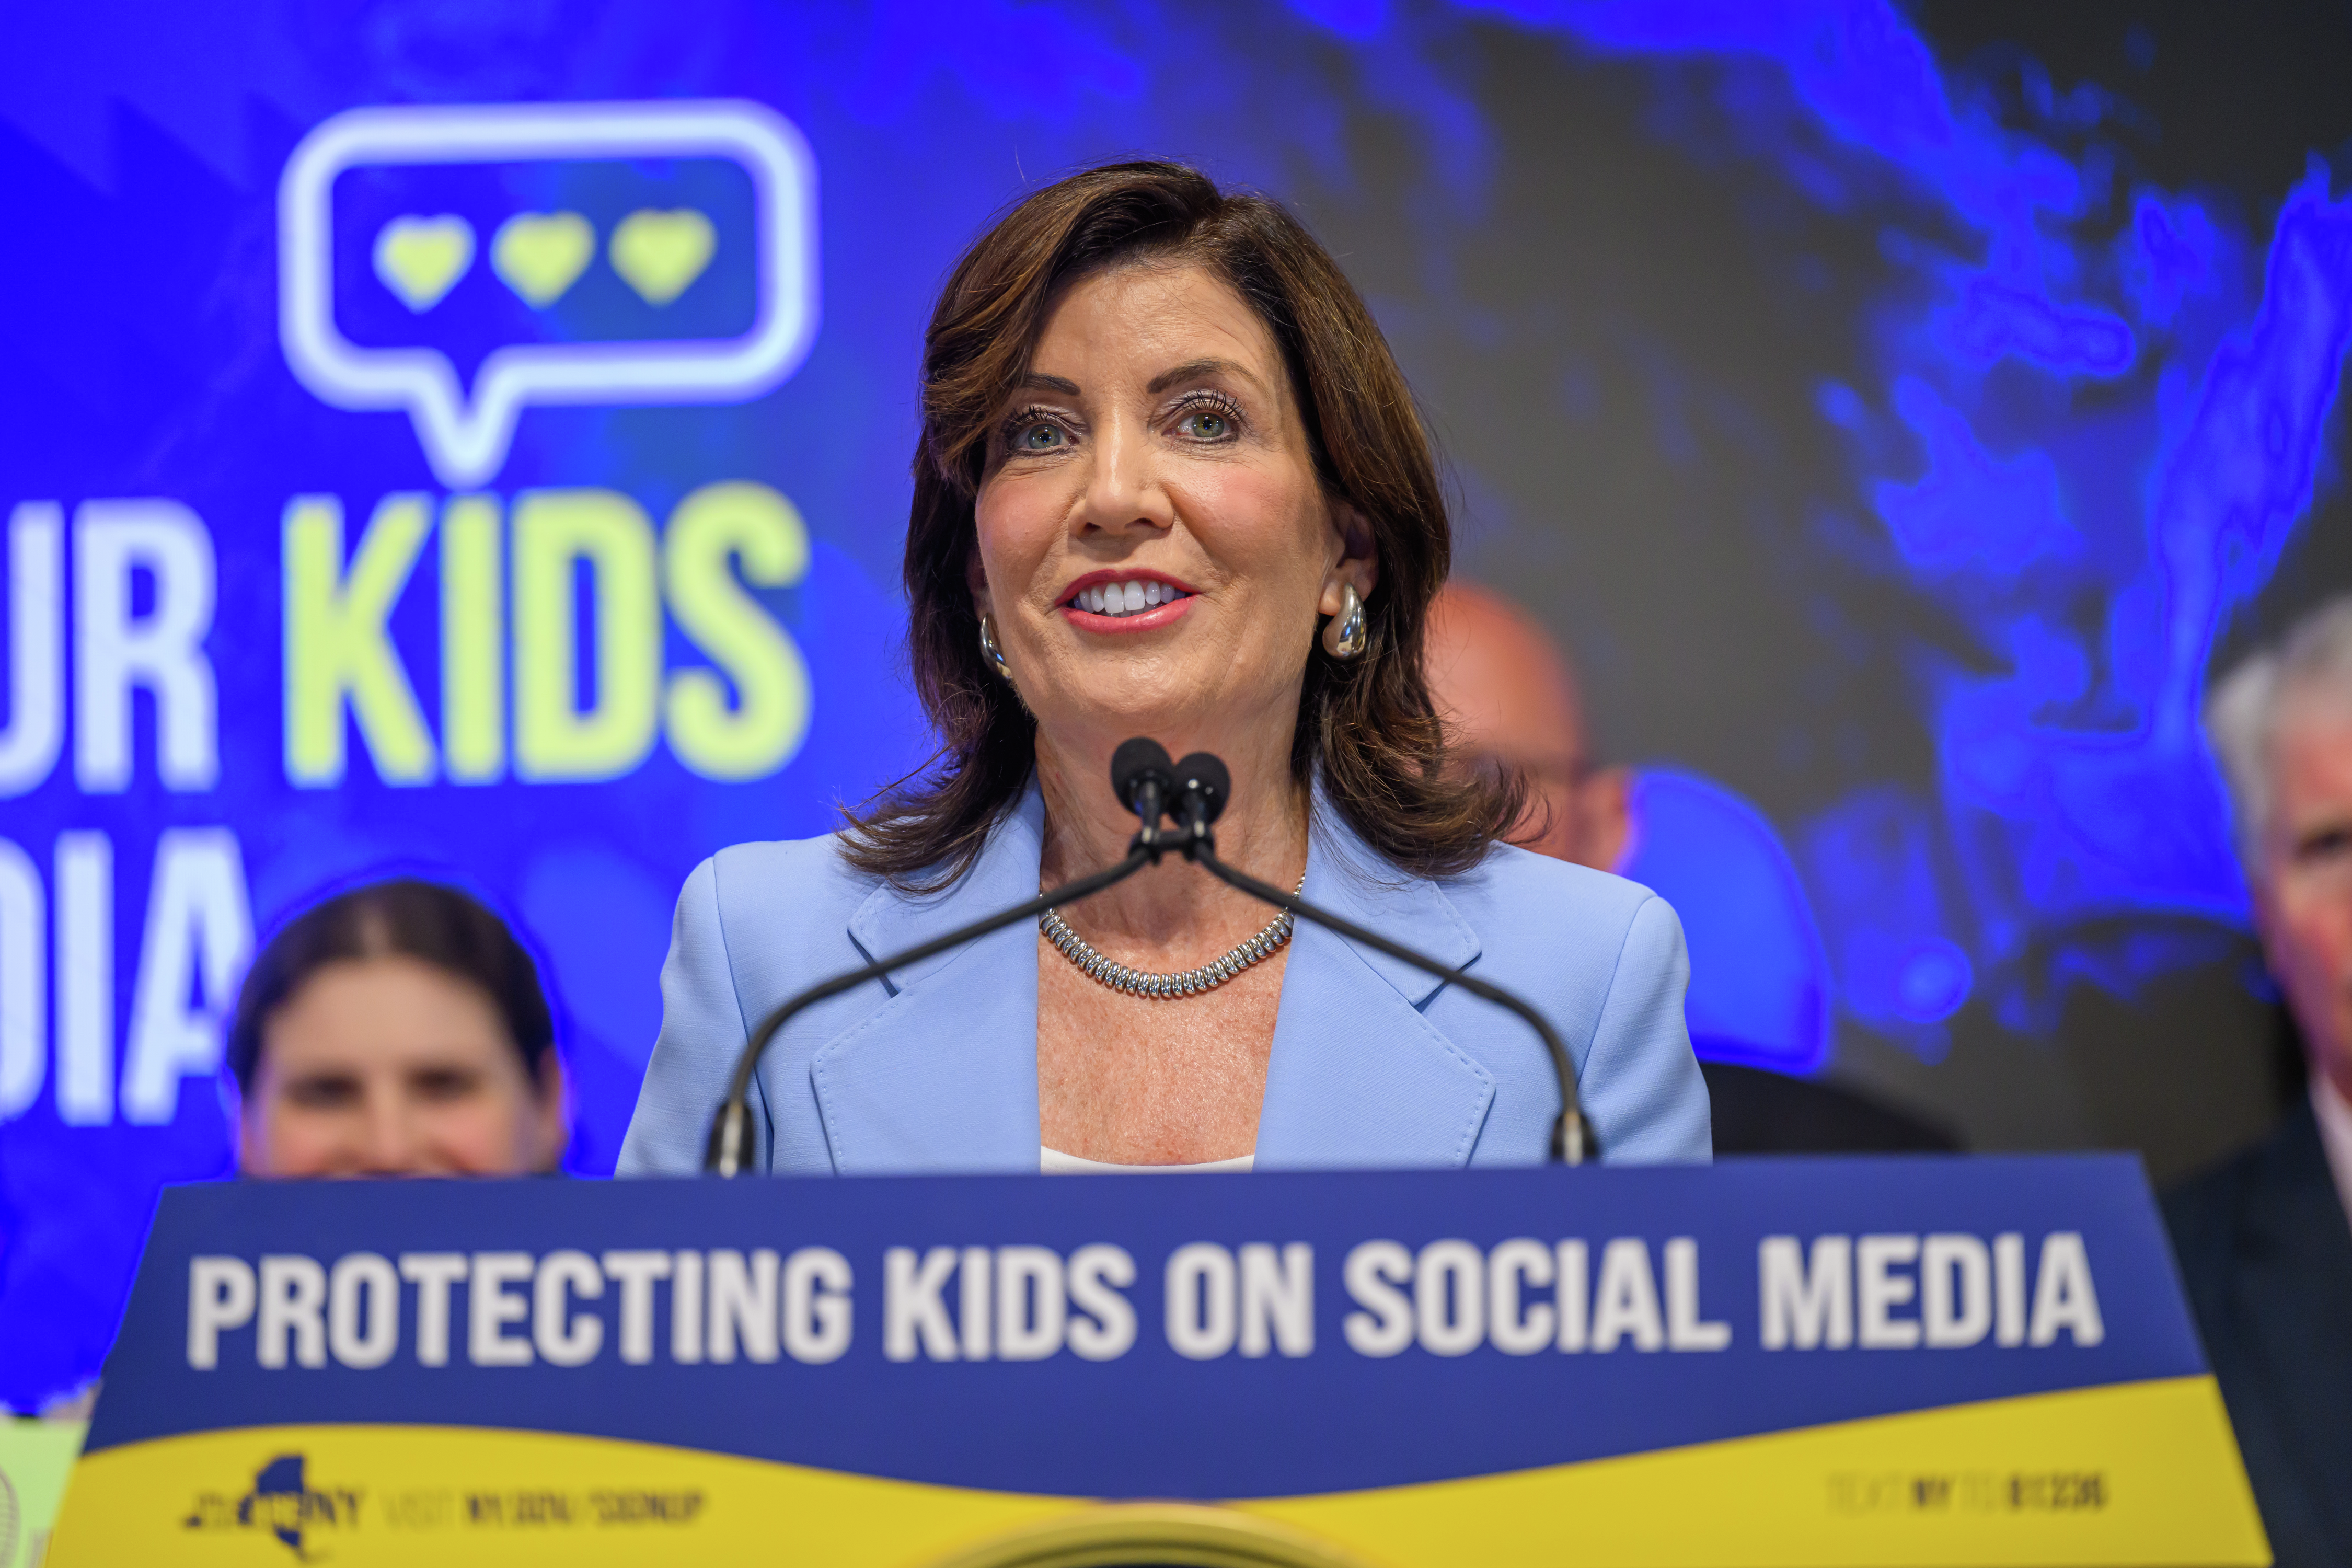 New York Gov. Kathy Hochul signs a bill into law that restricts addictive social media feeds for children